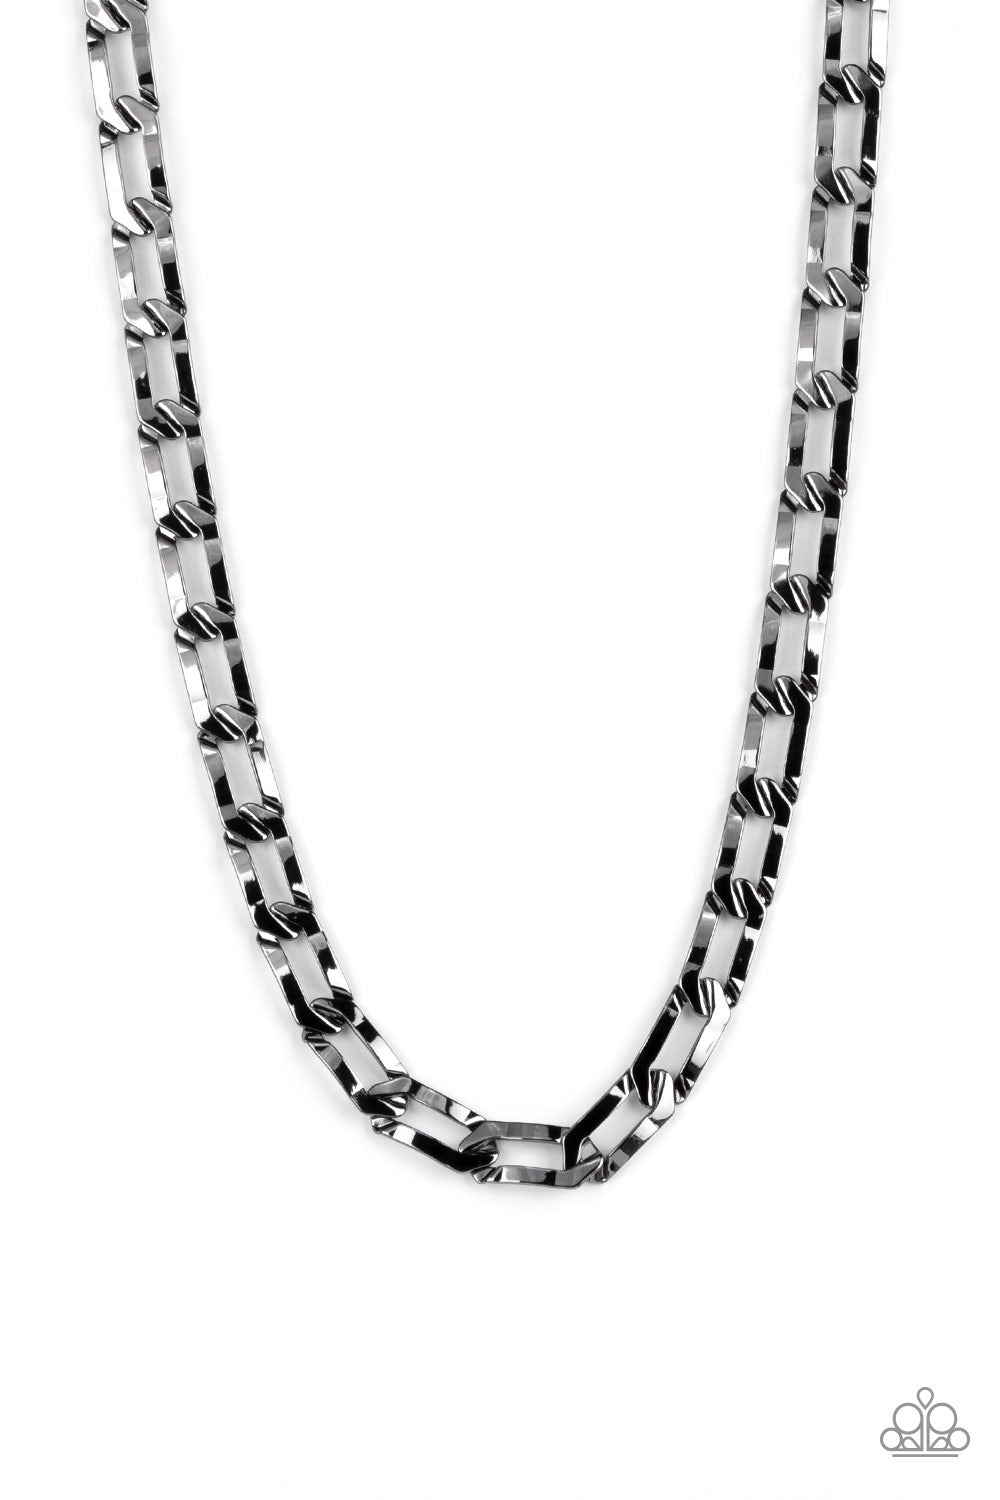 Full-Court Press Black Urban Necklace - Paparazzi Accessories  Crimped gunmetal oval links boldly interconnect across the chest, creating a classic urban look. Features an adjustable clasp closure.  All Paparazzi Accessories are lead free and nickel free!  Sold as one individual necklace.